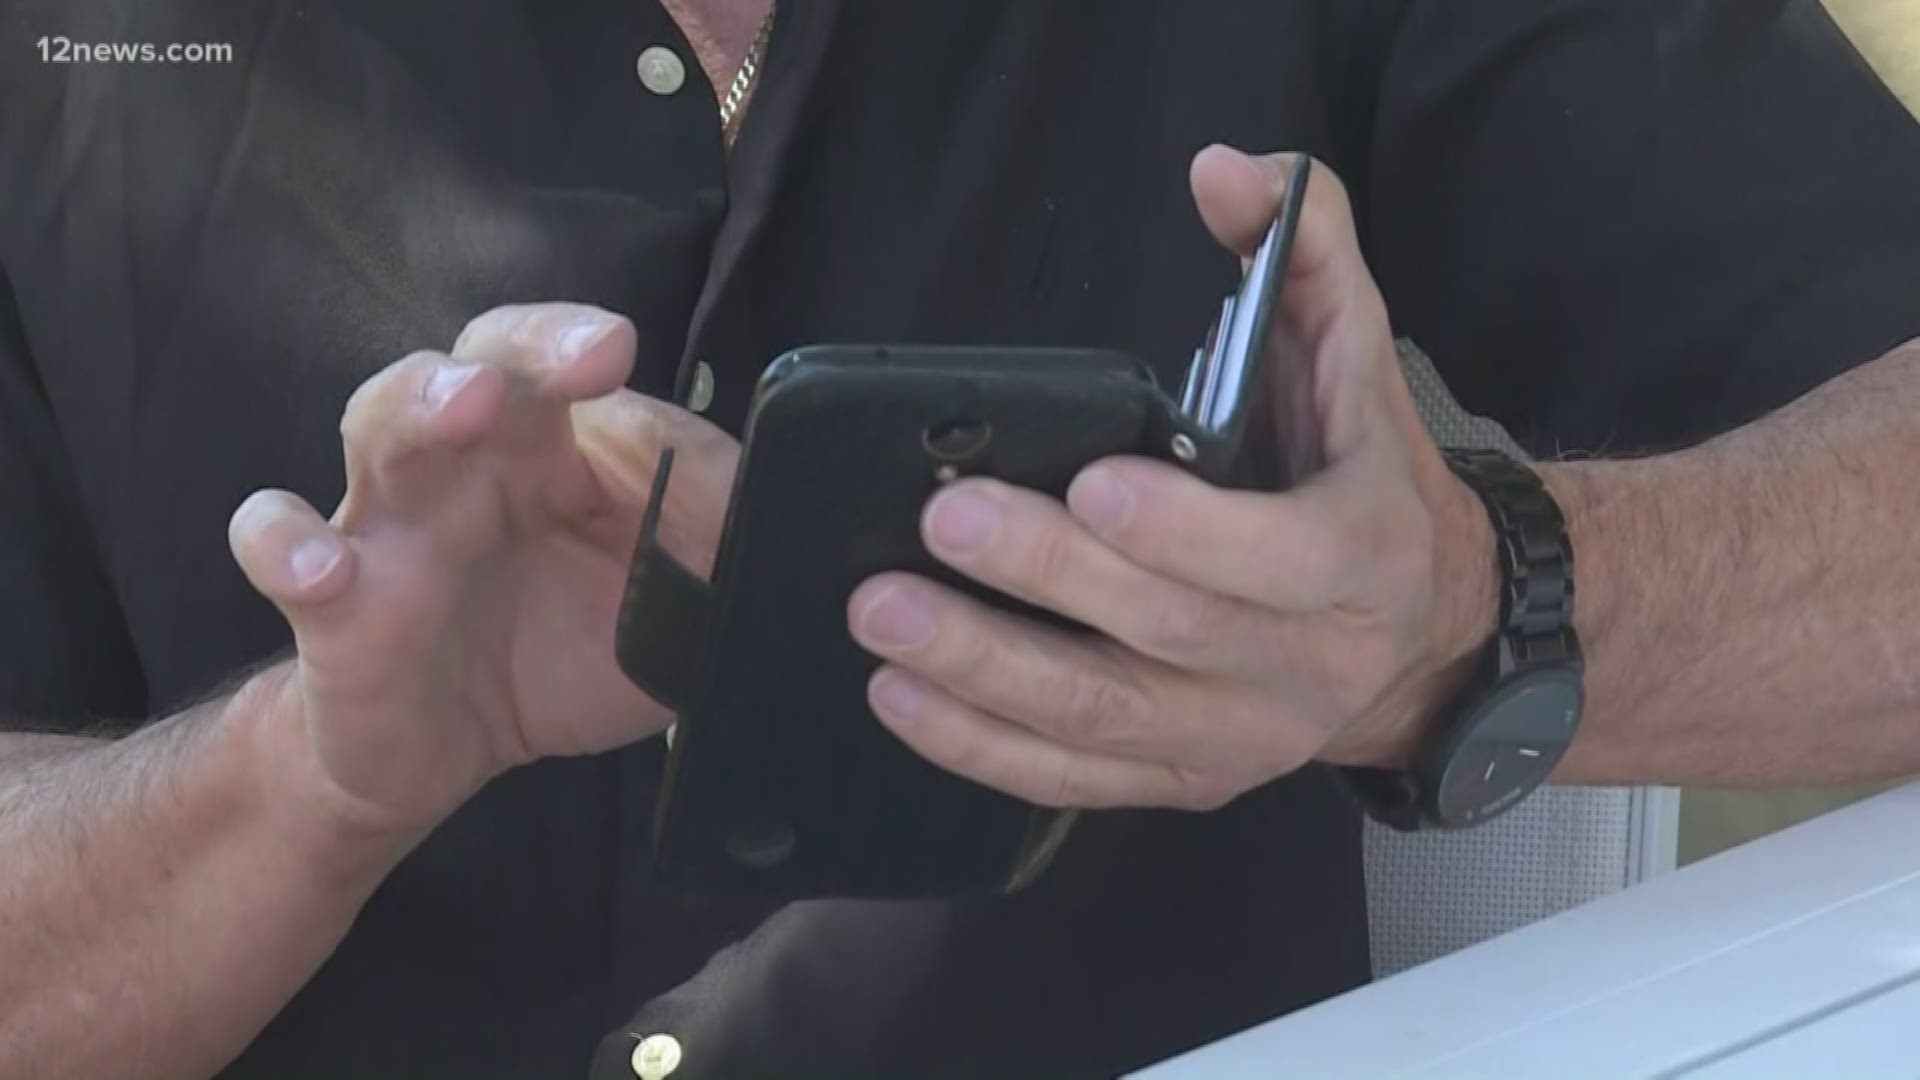 Phoenix man is putting out a warning after almost falling for a phone scam. He got a call that his daughter had been hurt. It quickly escalated into a ransom demand.